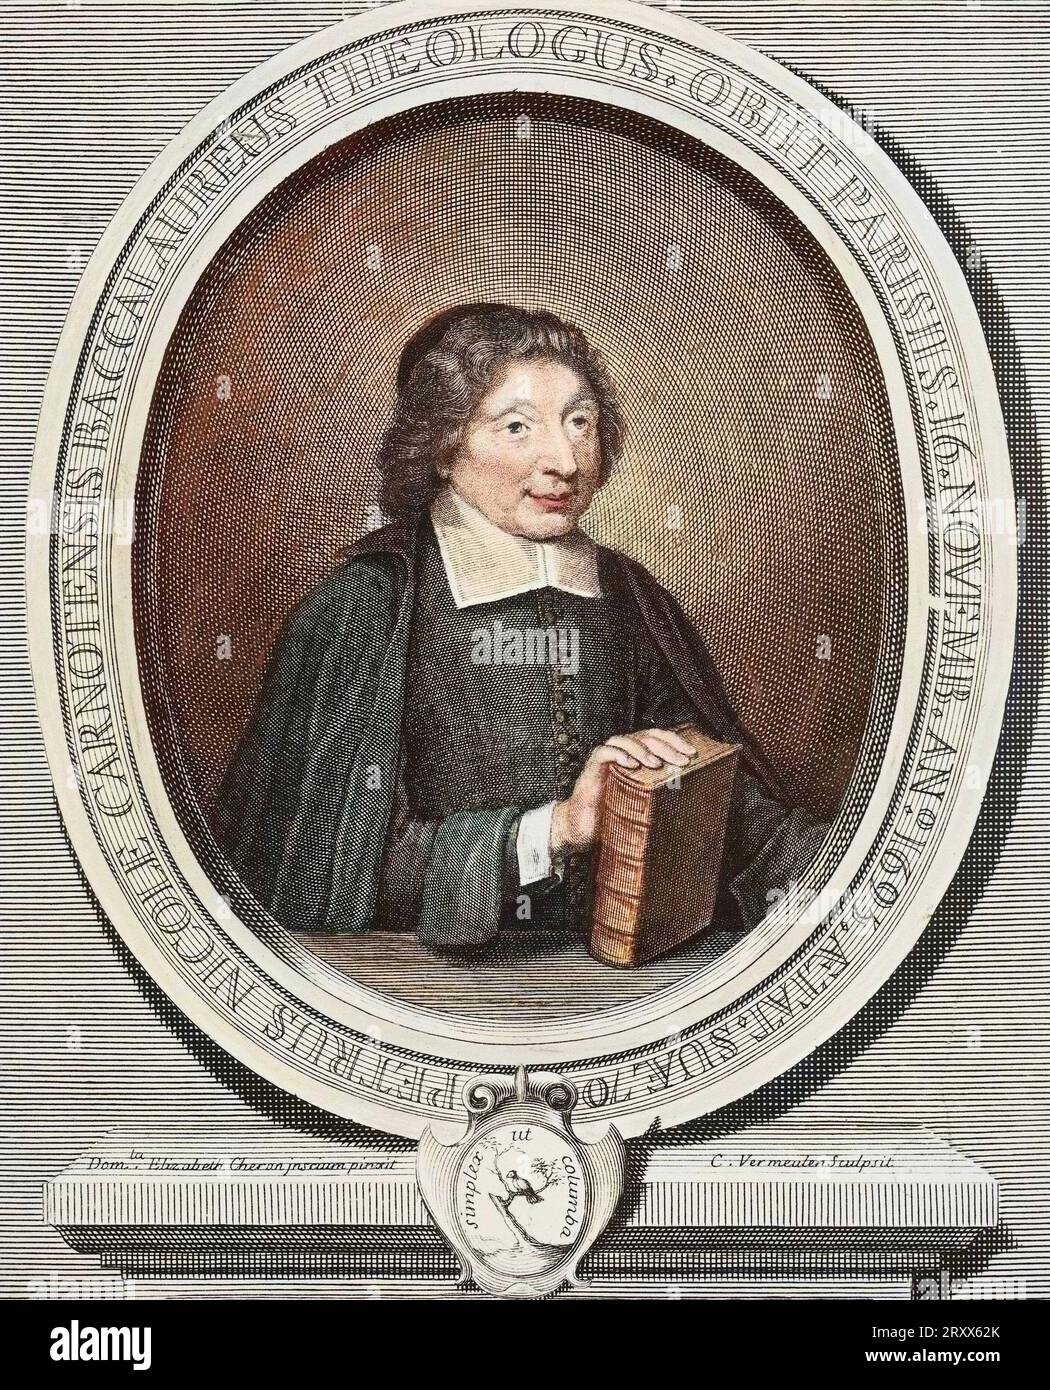 Pierre Nicole French theologian, moralist, logician and controversialist, who was born on 19 October 1625 in Chartres and died on 16 November 1695 in Paris. He is considered one of the main Jansenist authors. Stock Photo